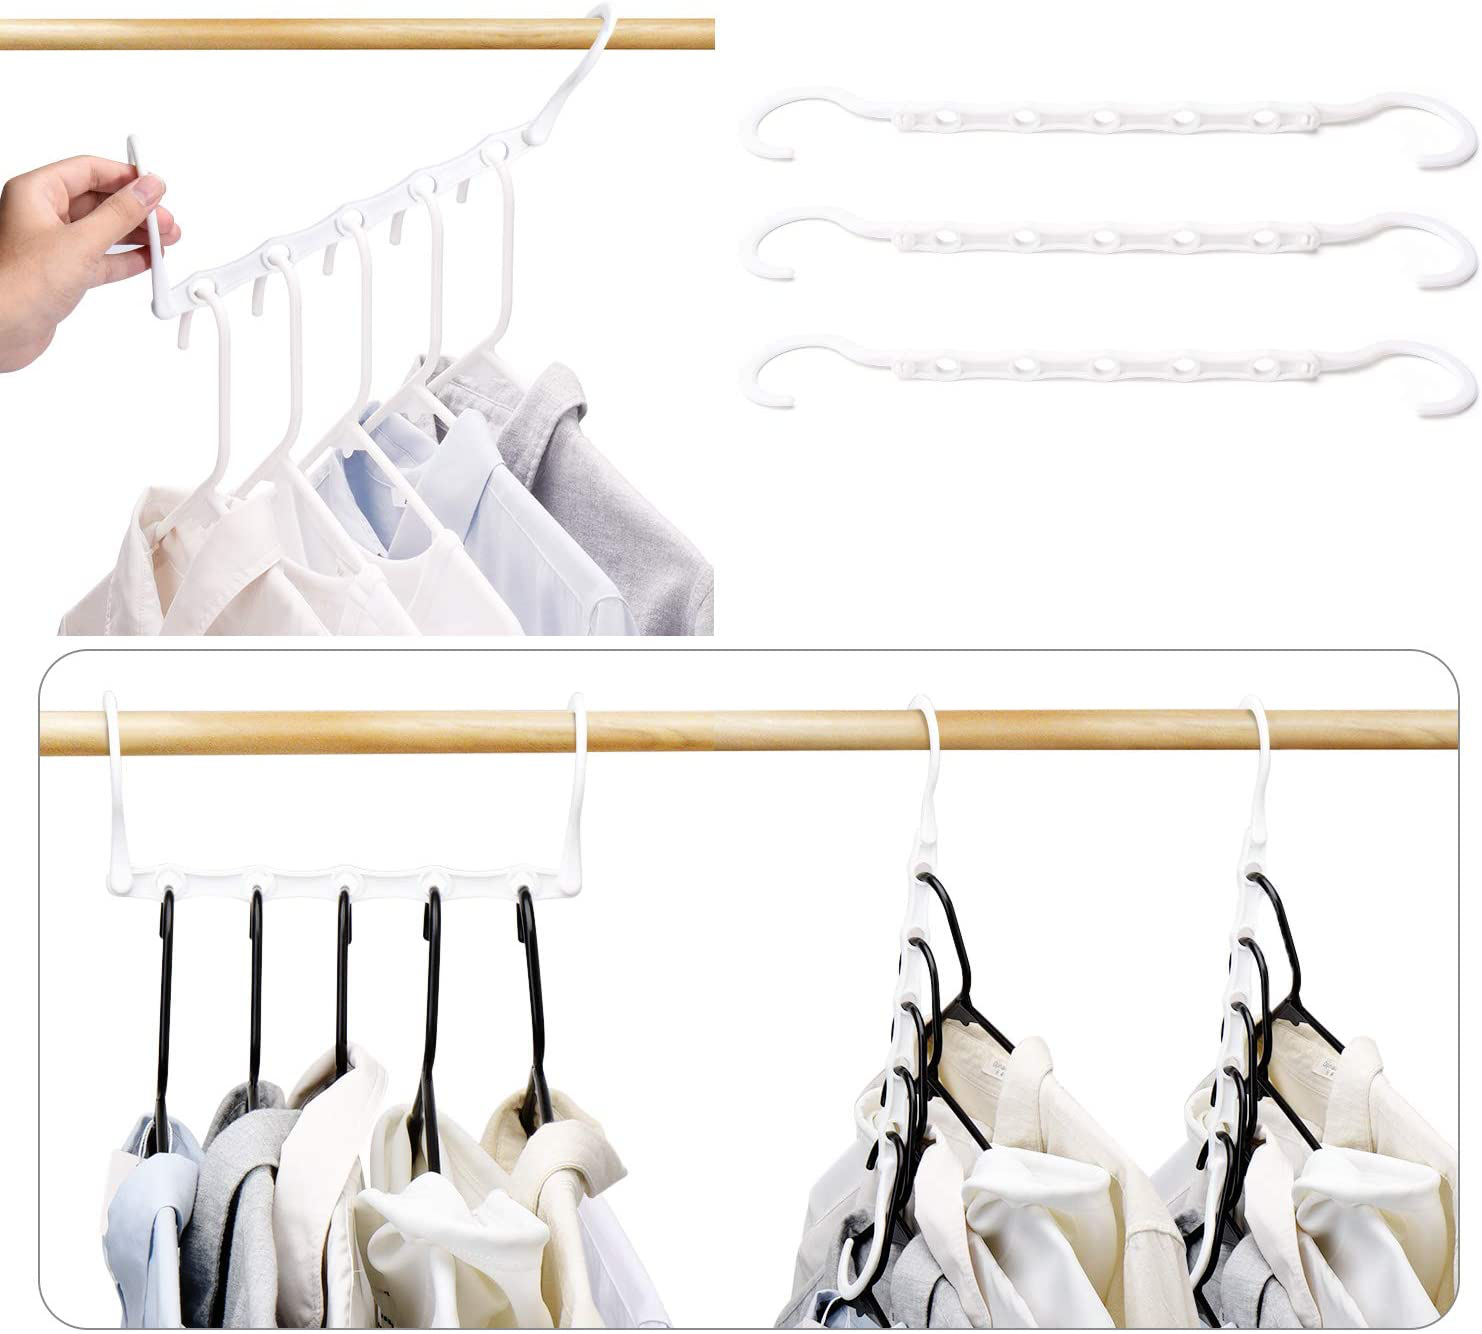 HOUSE DAY White Magic Hangers Space Saving Clothes Hangers Organizer Smart Closet Space Saver Pack of 16 with Sturdy Plastic for Heavy Clothes